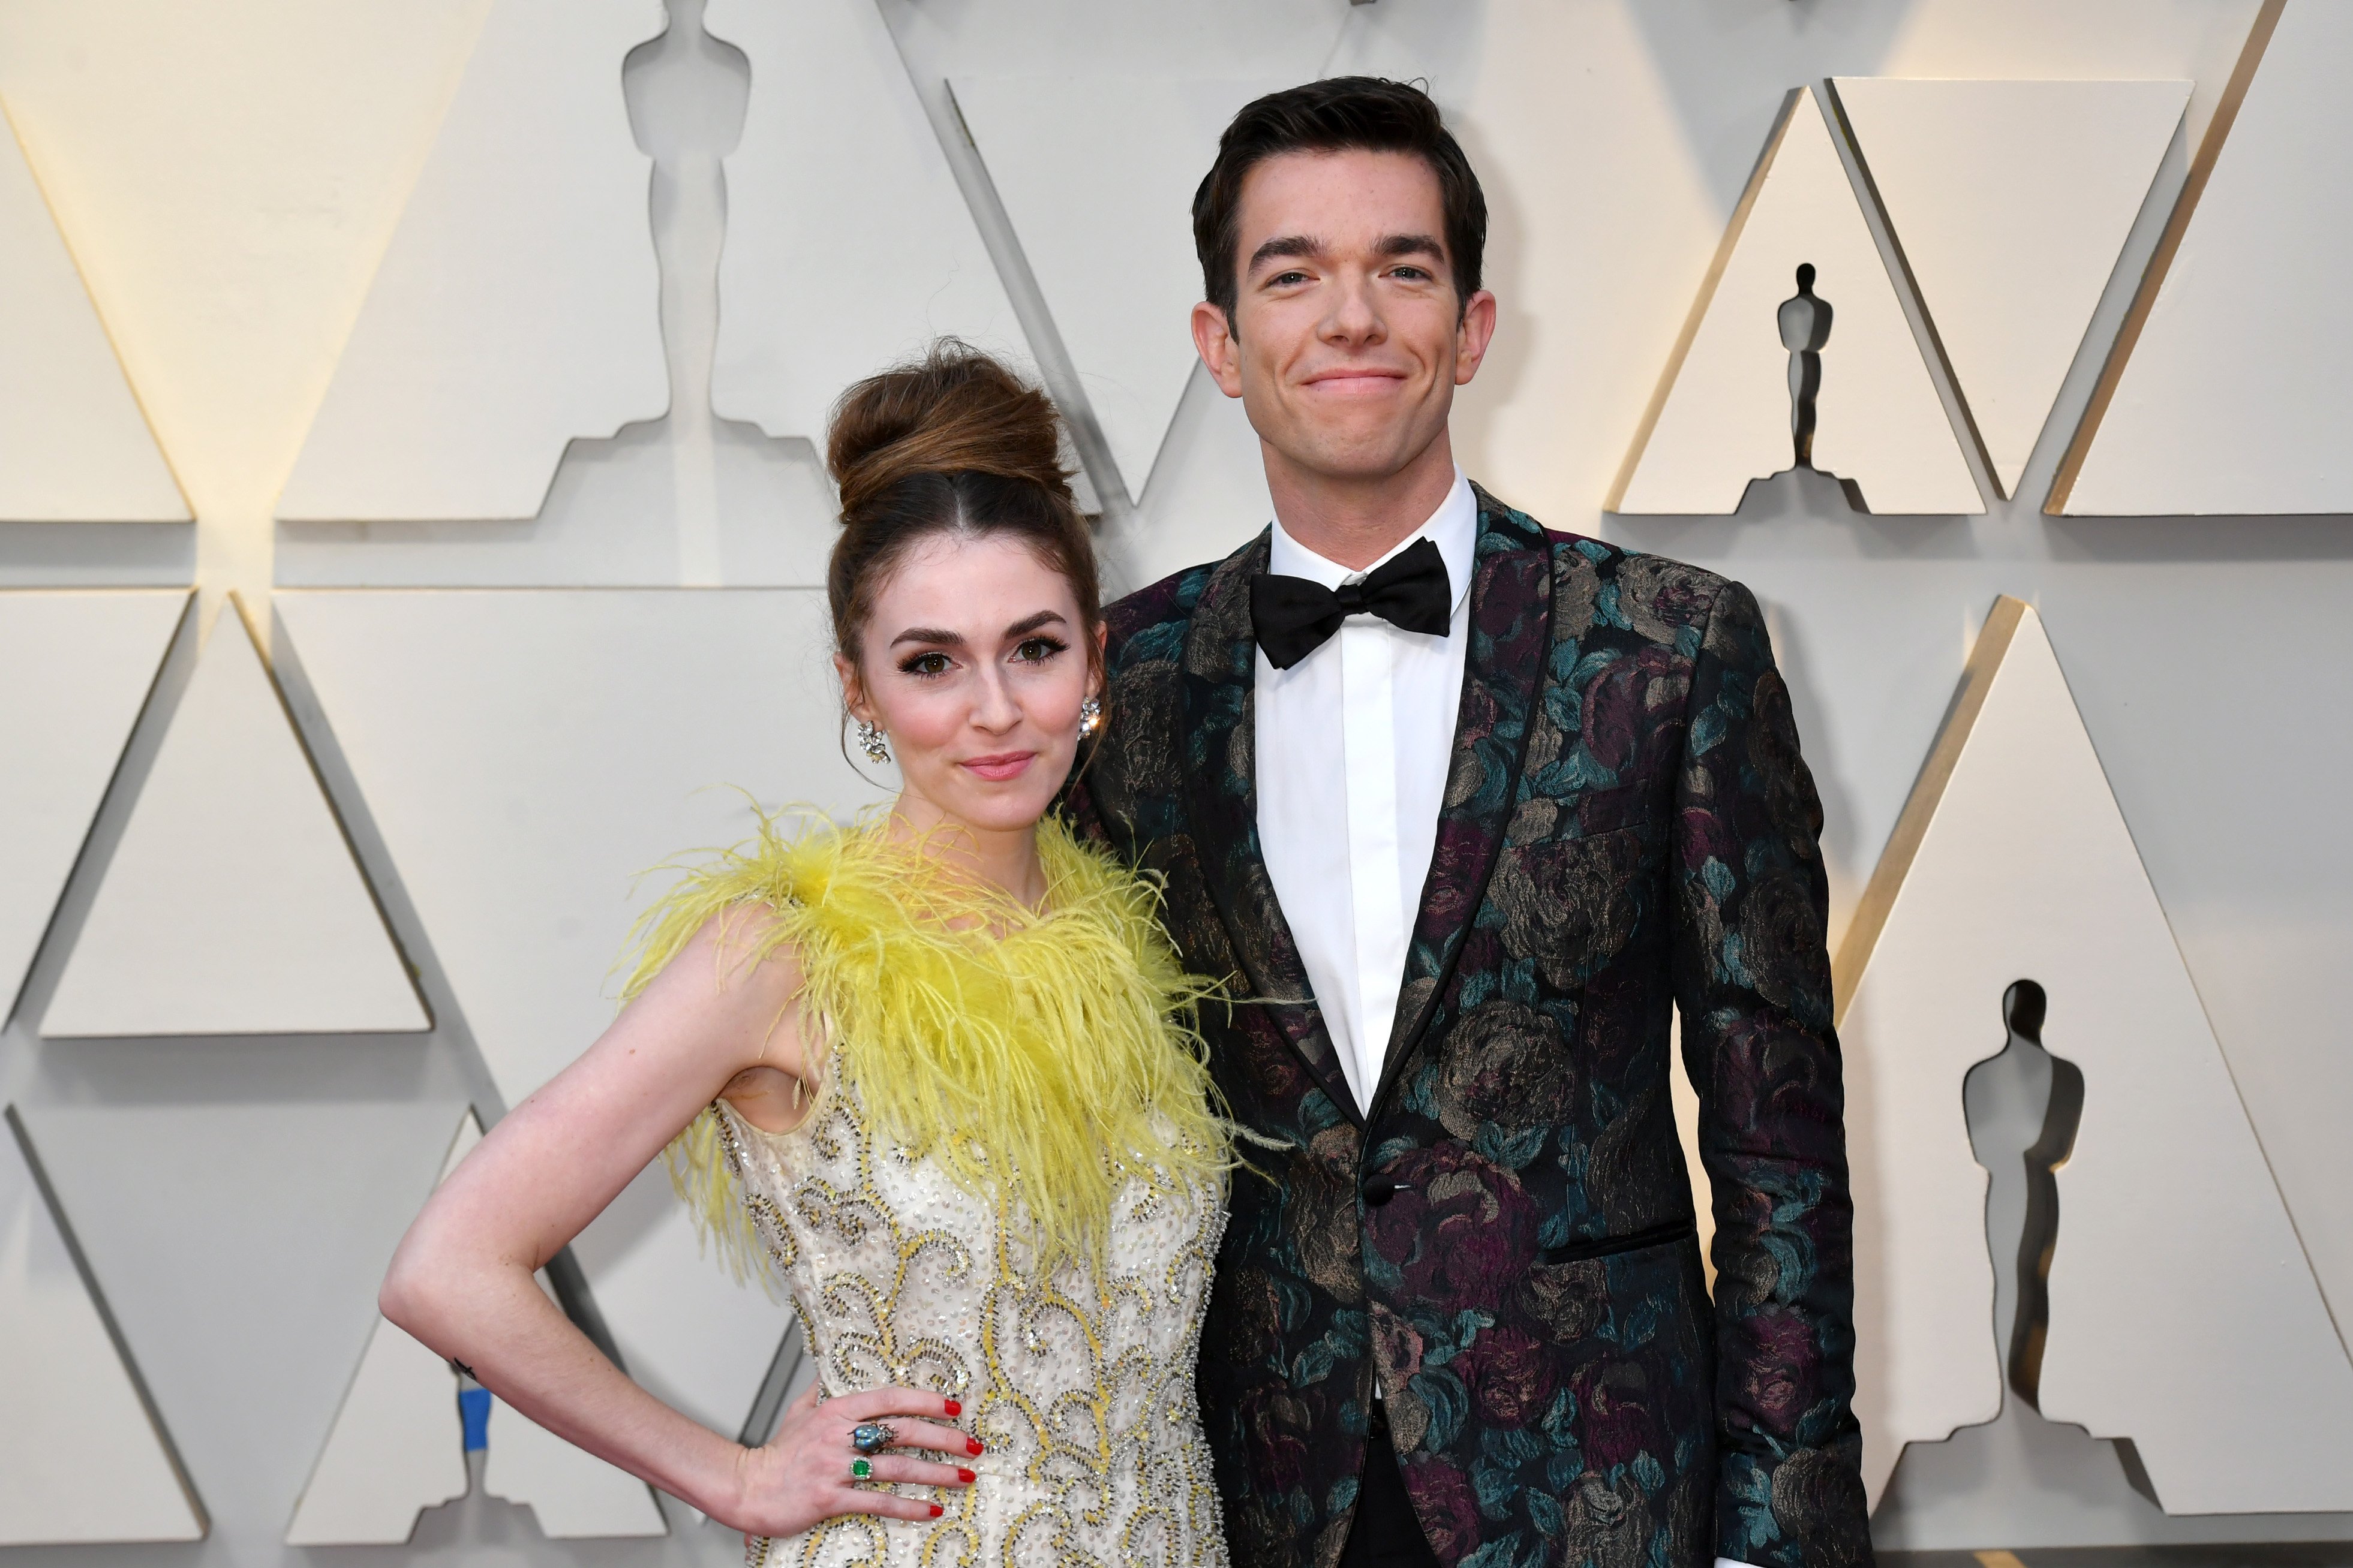 Annamarie Tendler and John Mulaney pose for photos after arriving at the 91st Annual Academy Awards in 2019